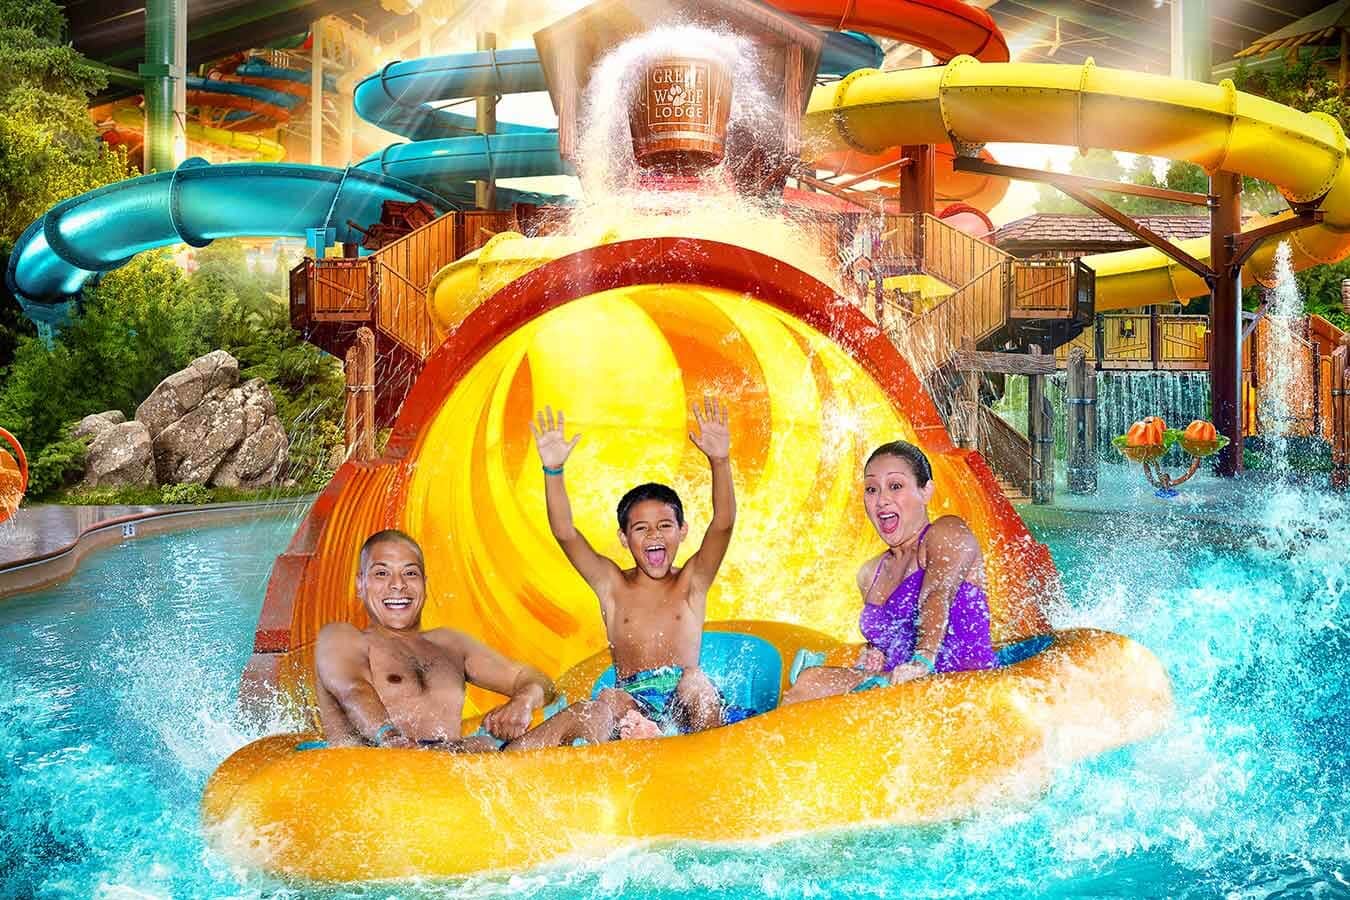 Spring break ideas for families at an indoor water park | The Dating Divas